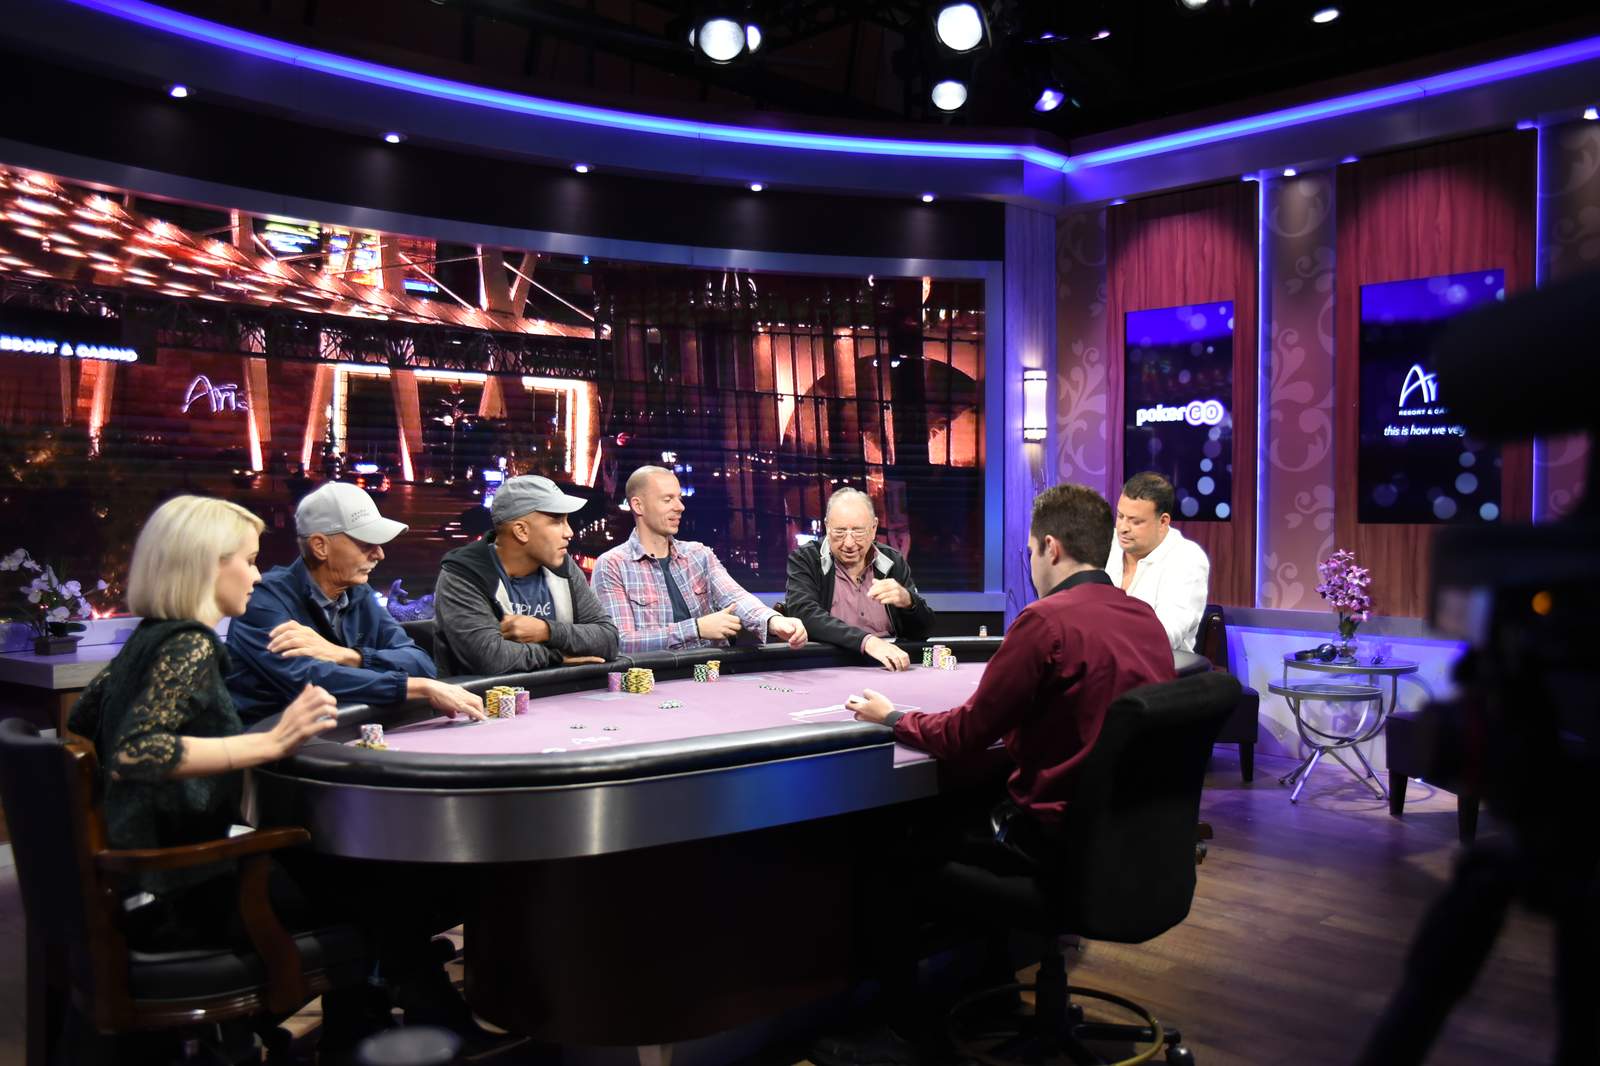 Relive "Games of our Lives" on PokerGO